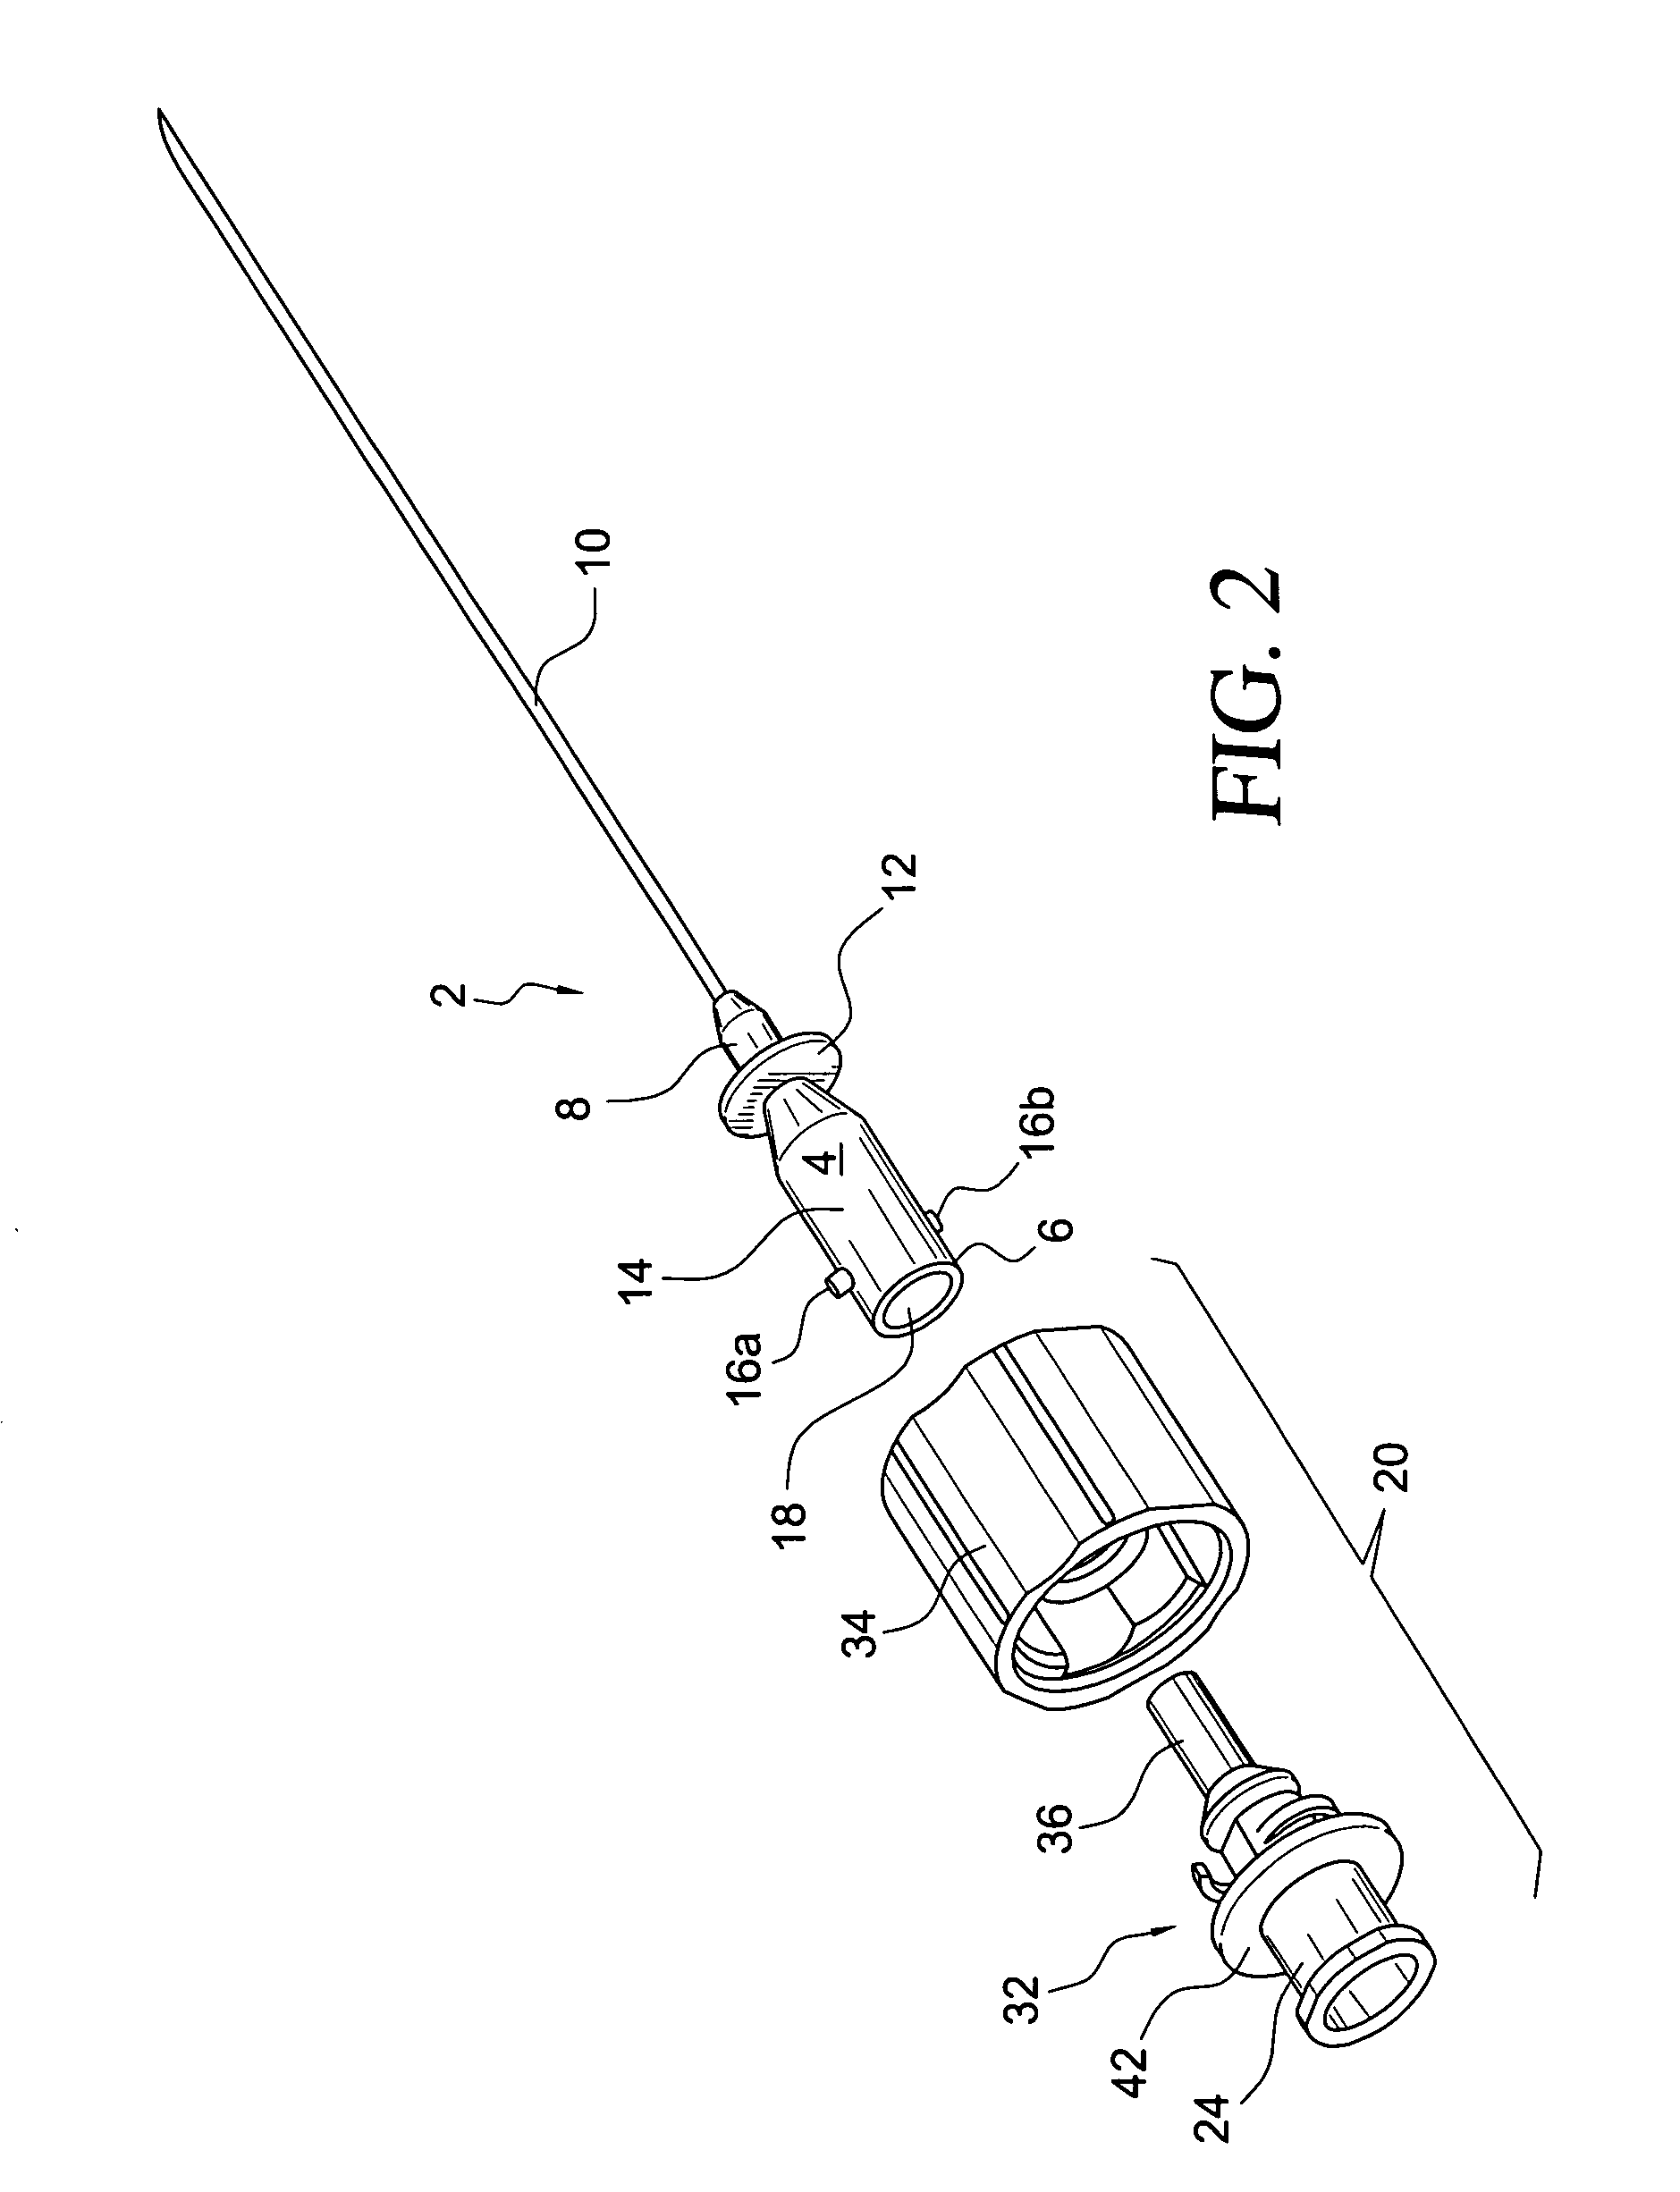 Safety needle assembly with correct medication connection